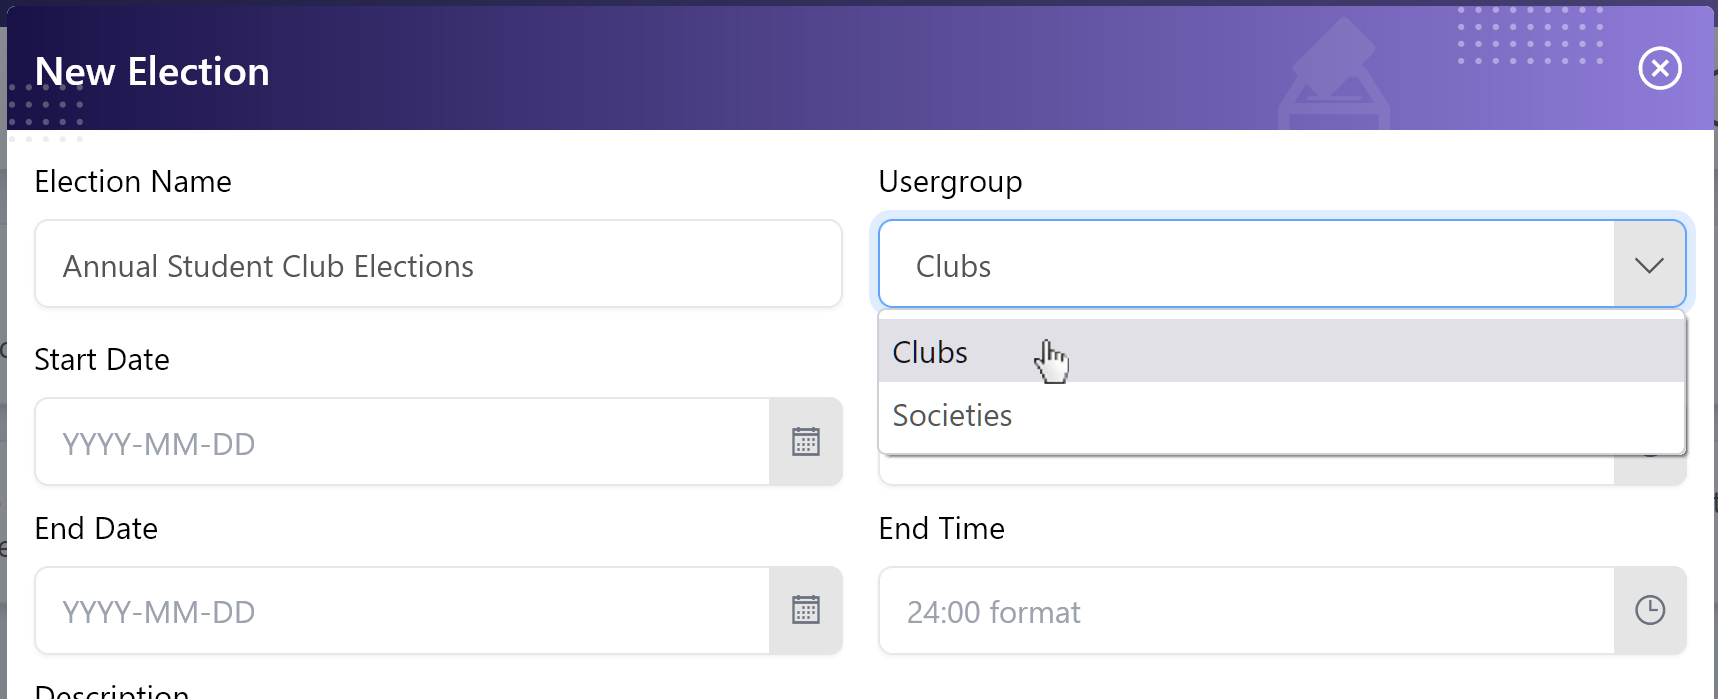 EM_redesign_account_management_assigning_usergroup_at_election_creation_normal